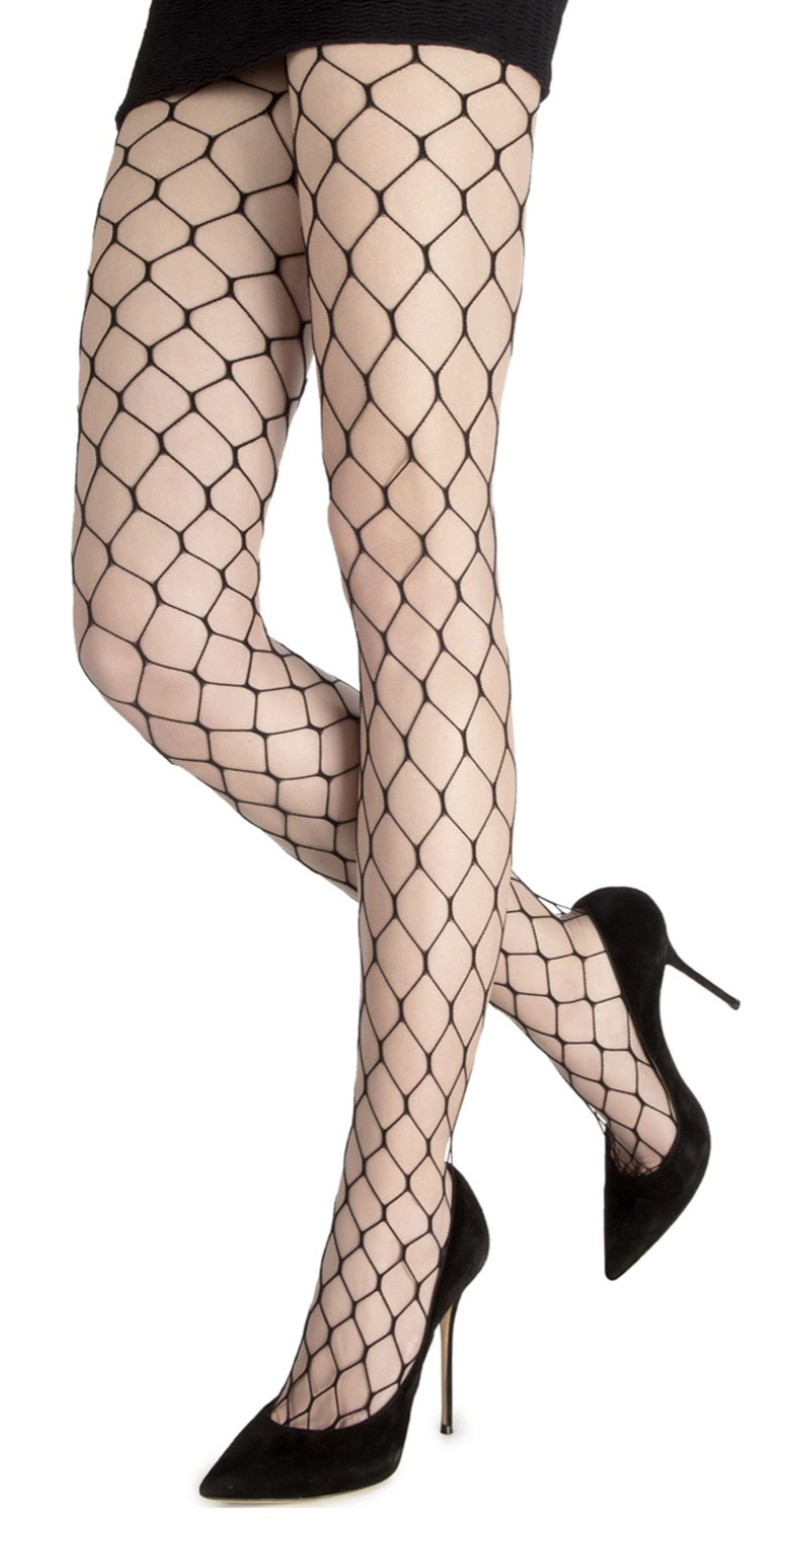 Emilio Cavallini Large Fishnet Tights - Extra wide black fence fishnet tights with micro mesh toe.